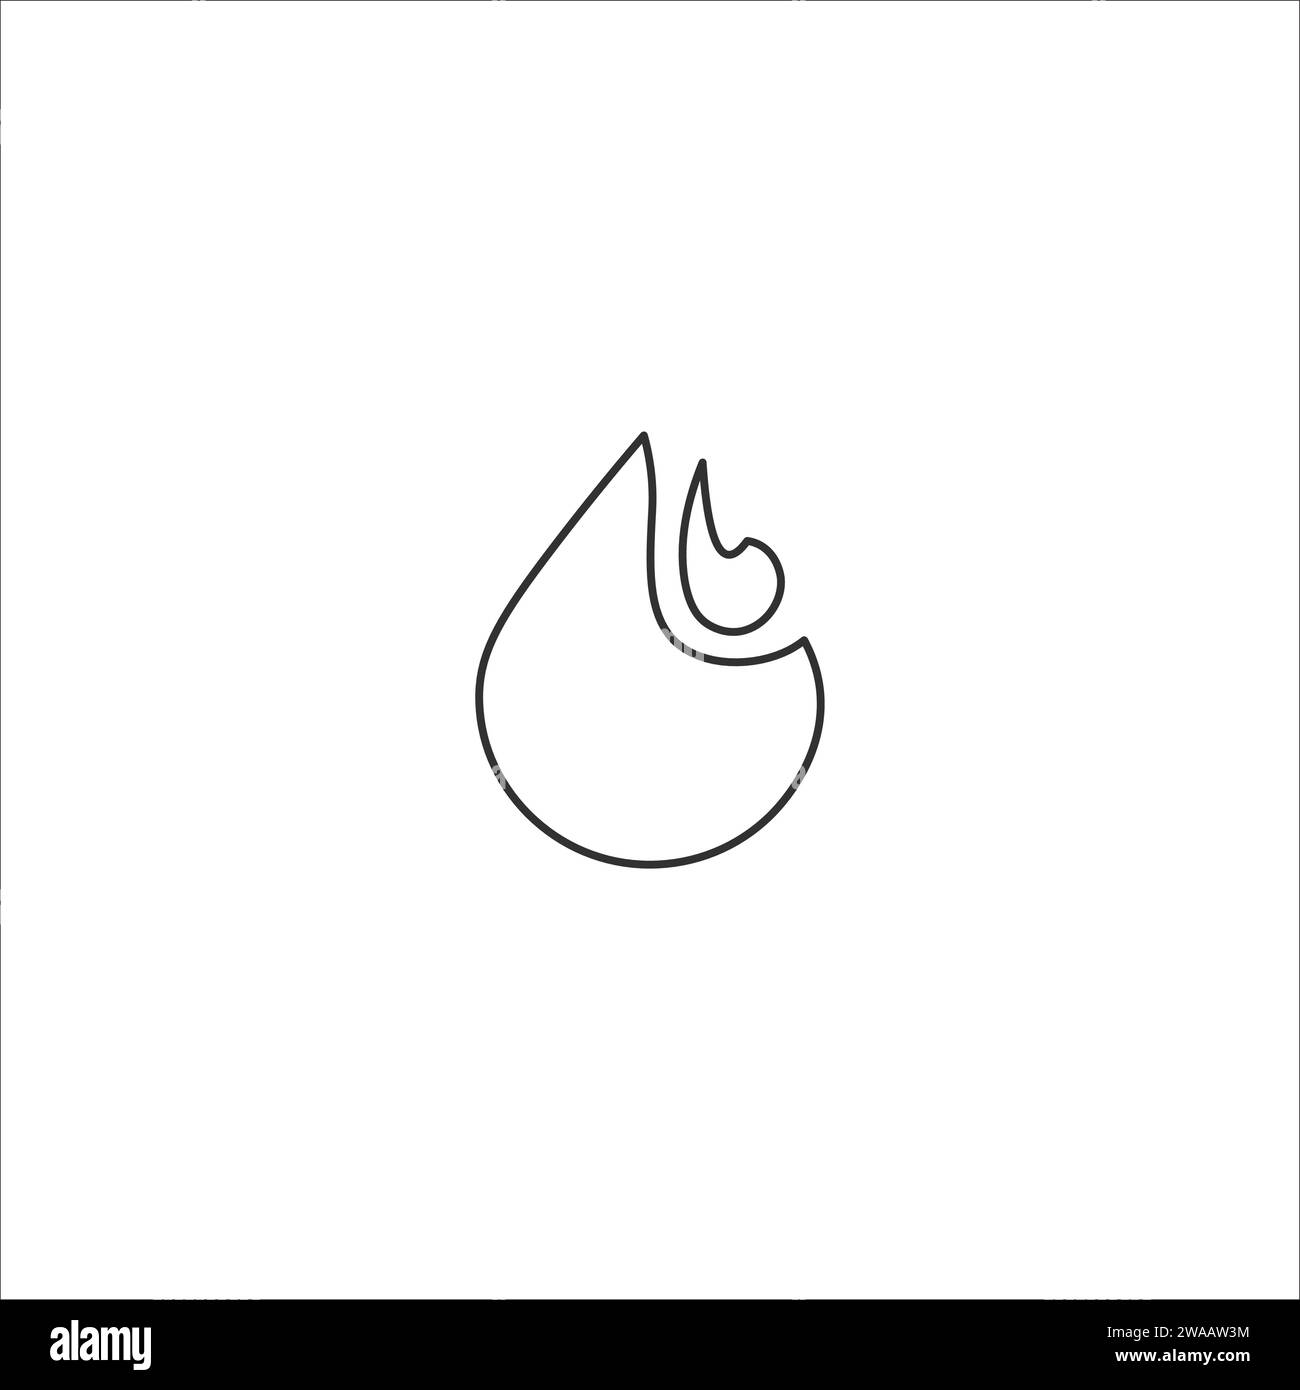 Fire, flame. Linear flame icon. Hot surface, campfire, flammable symbol. Stock vector illustration isolated on white background. Stock Vector